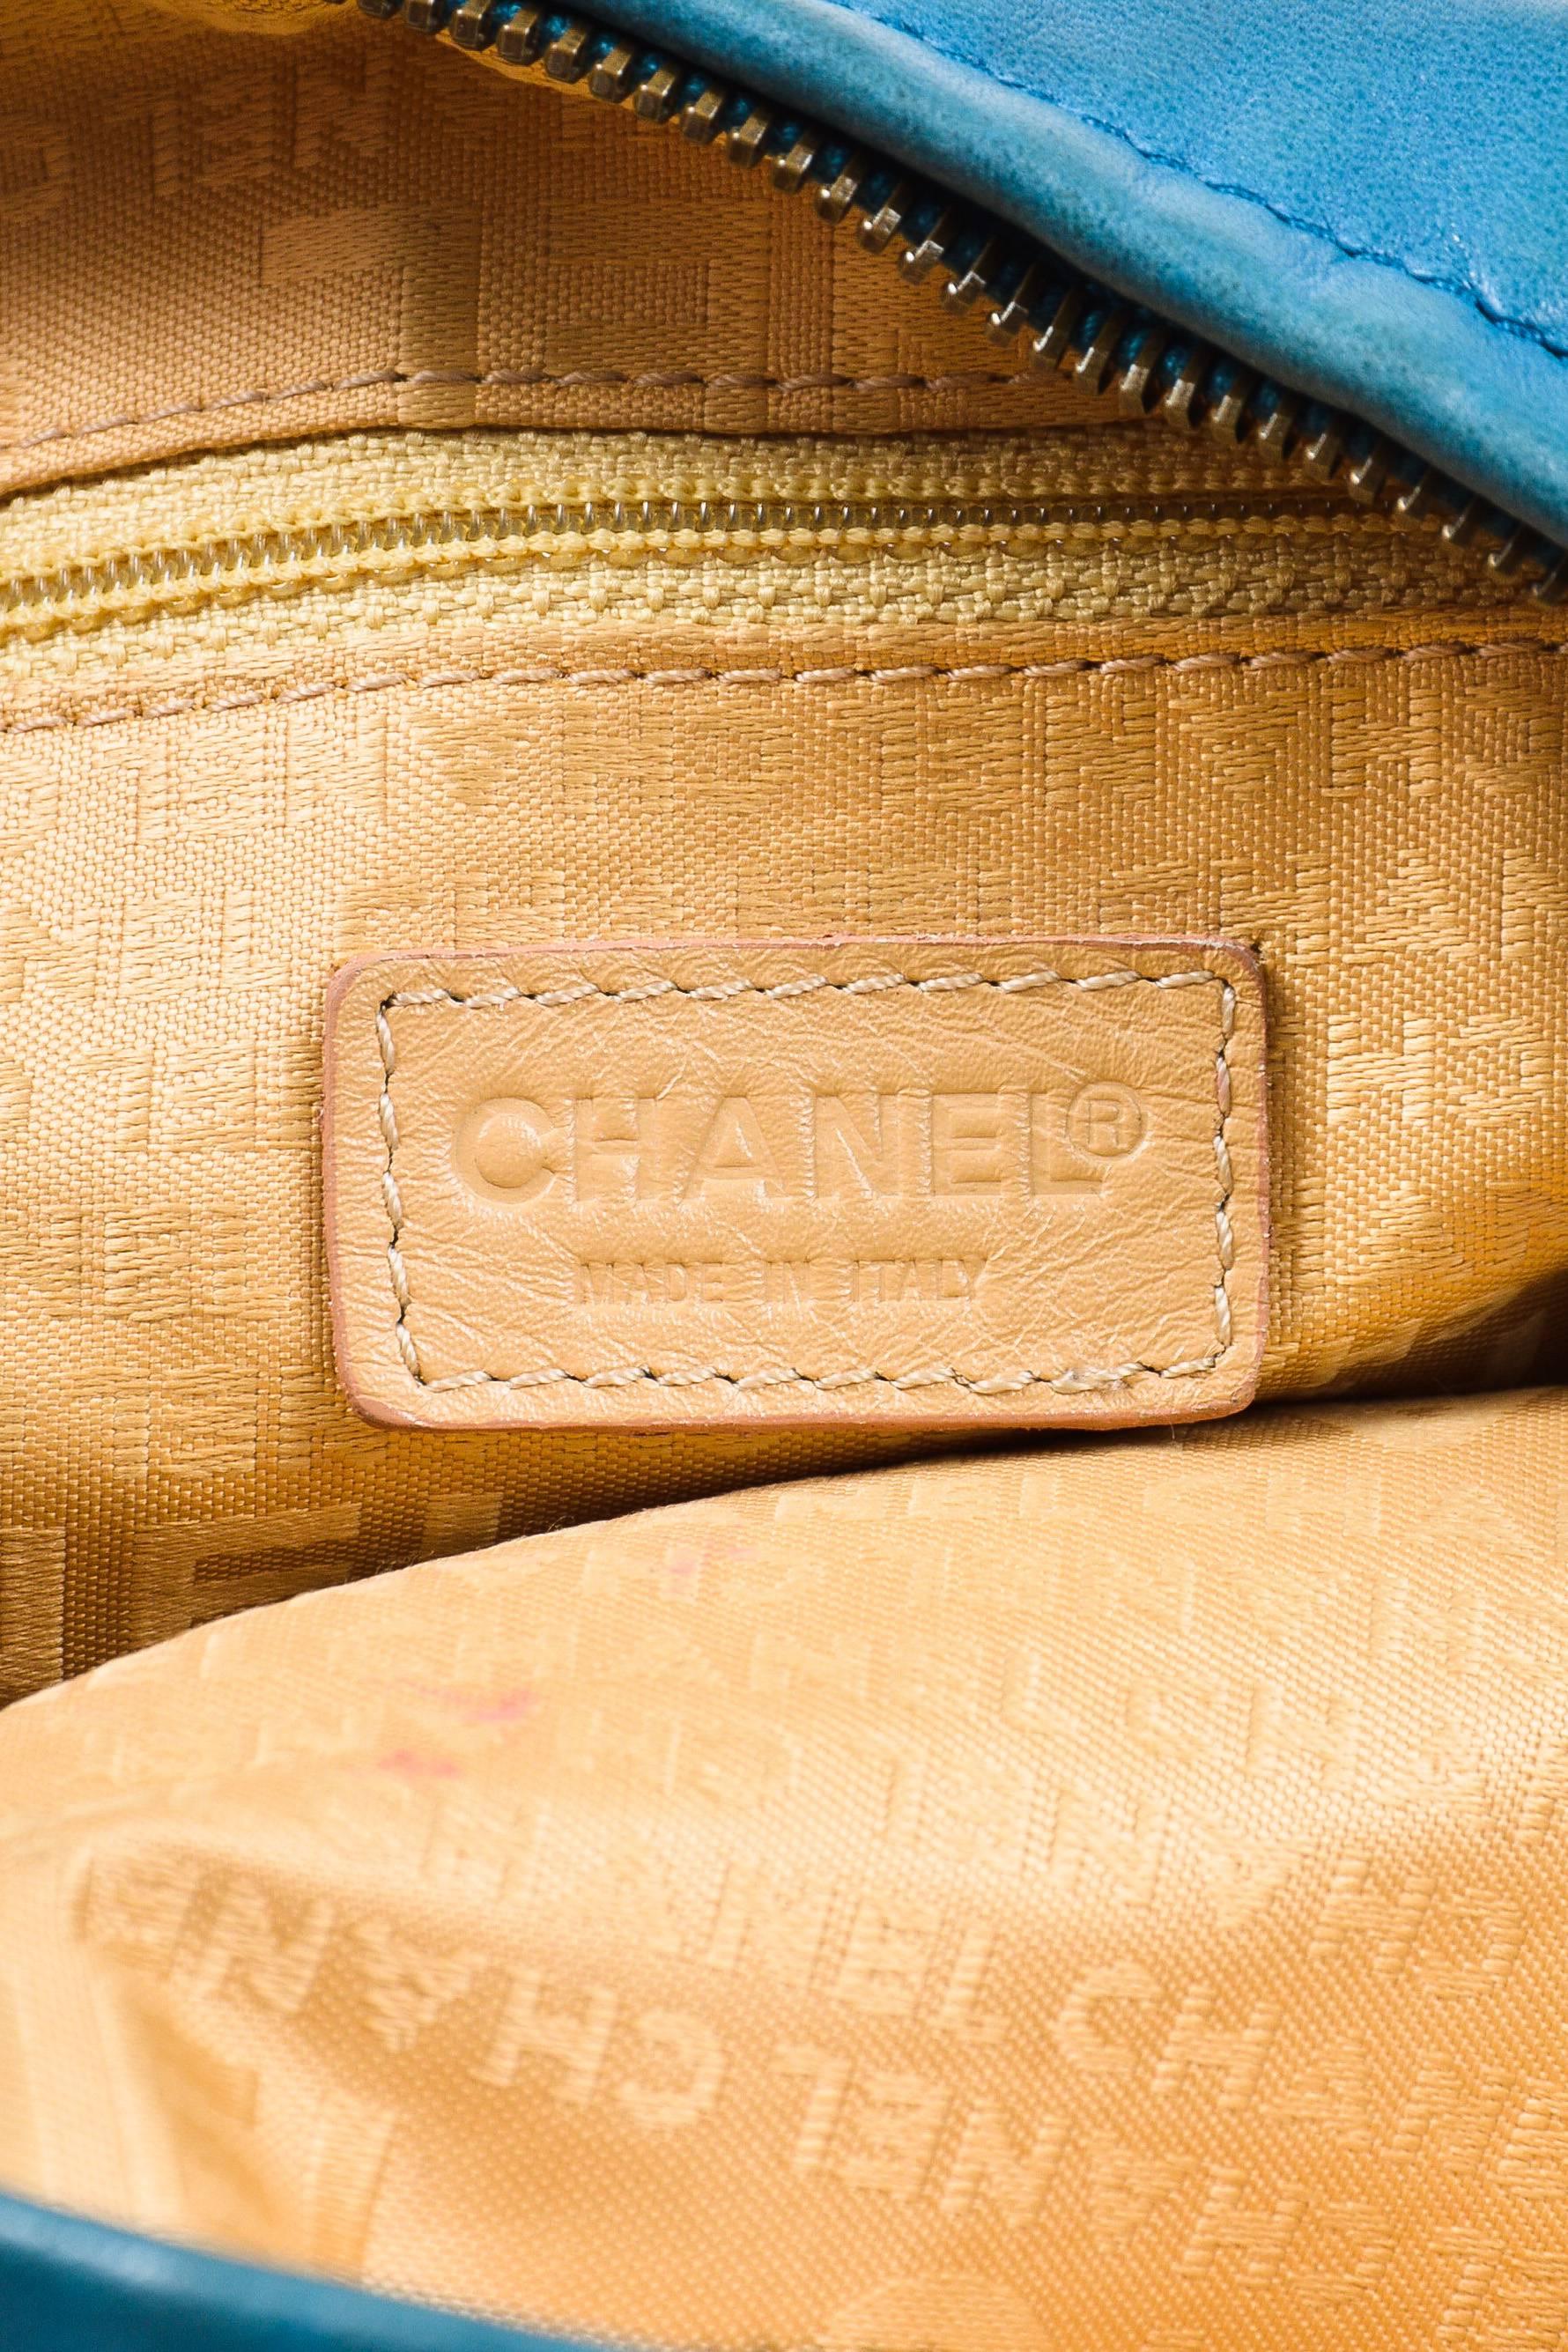 Chanel Teal Leather Bronze Tone 'CC' Ring Hobo Bag For Sale 2